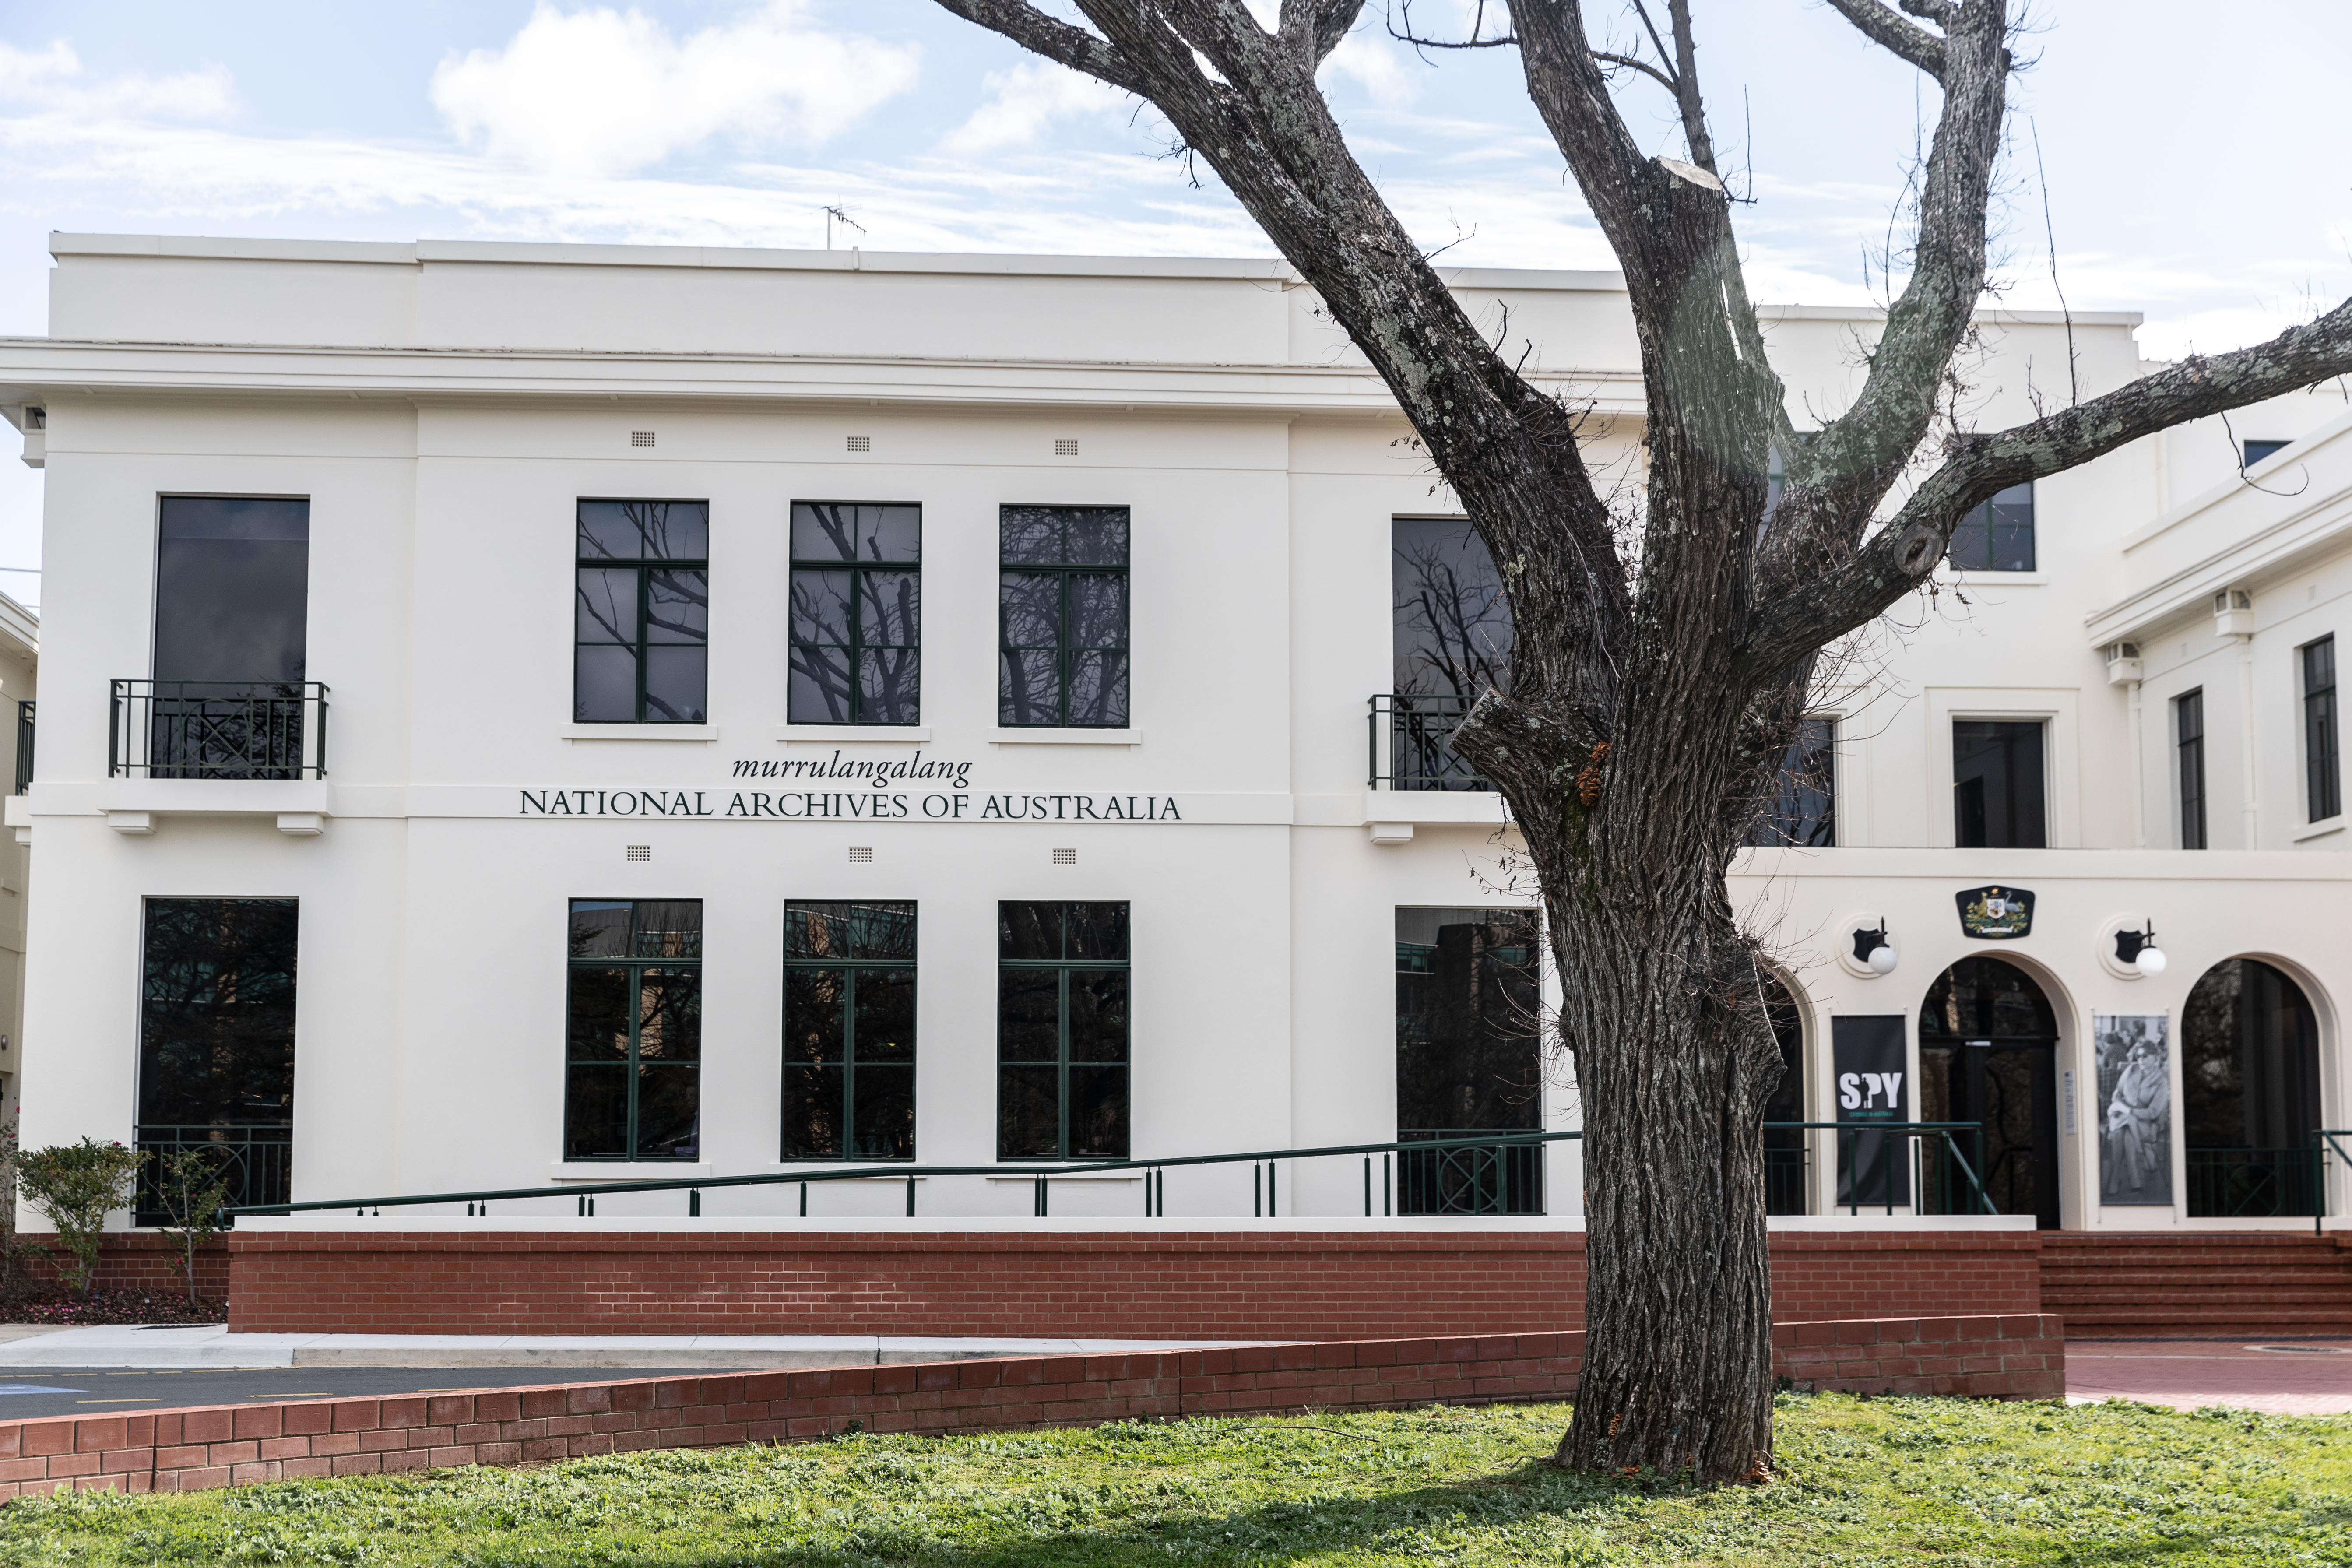 The National Archives of Australia building,<br>just near Parliament House in Canberra.